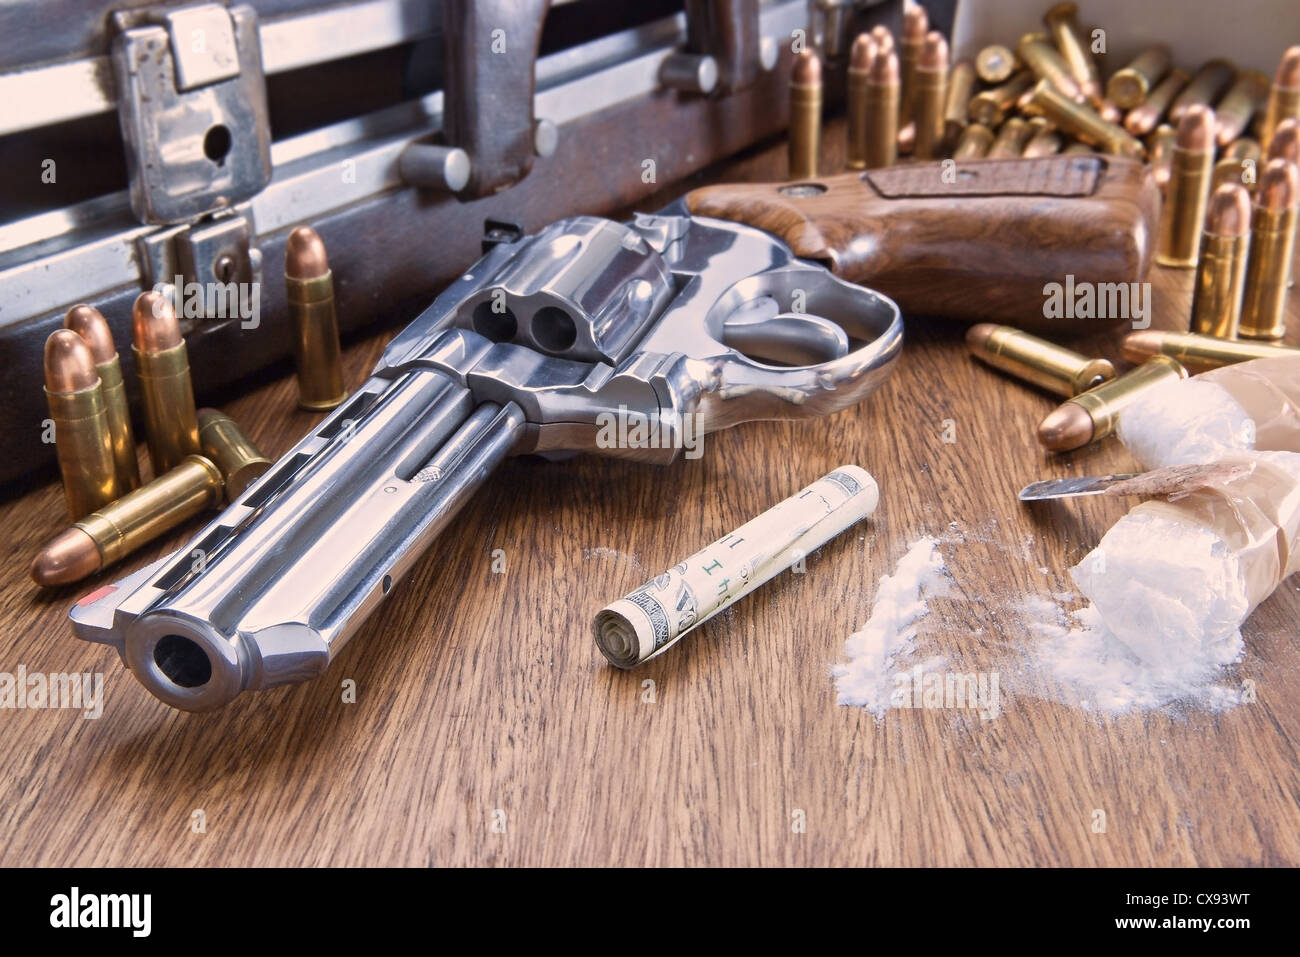 Image concept of drug trafficking. Gun, U.S. dollars, bullets and cocaine on the table. Stock Photo